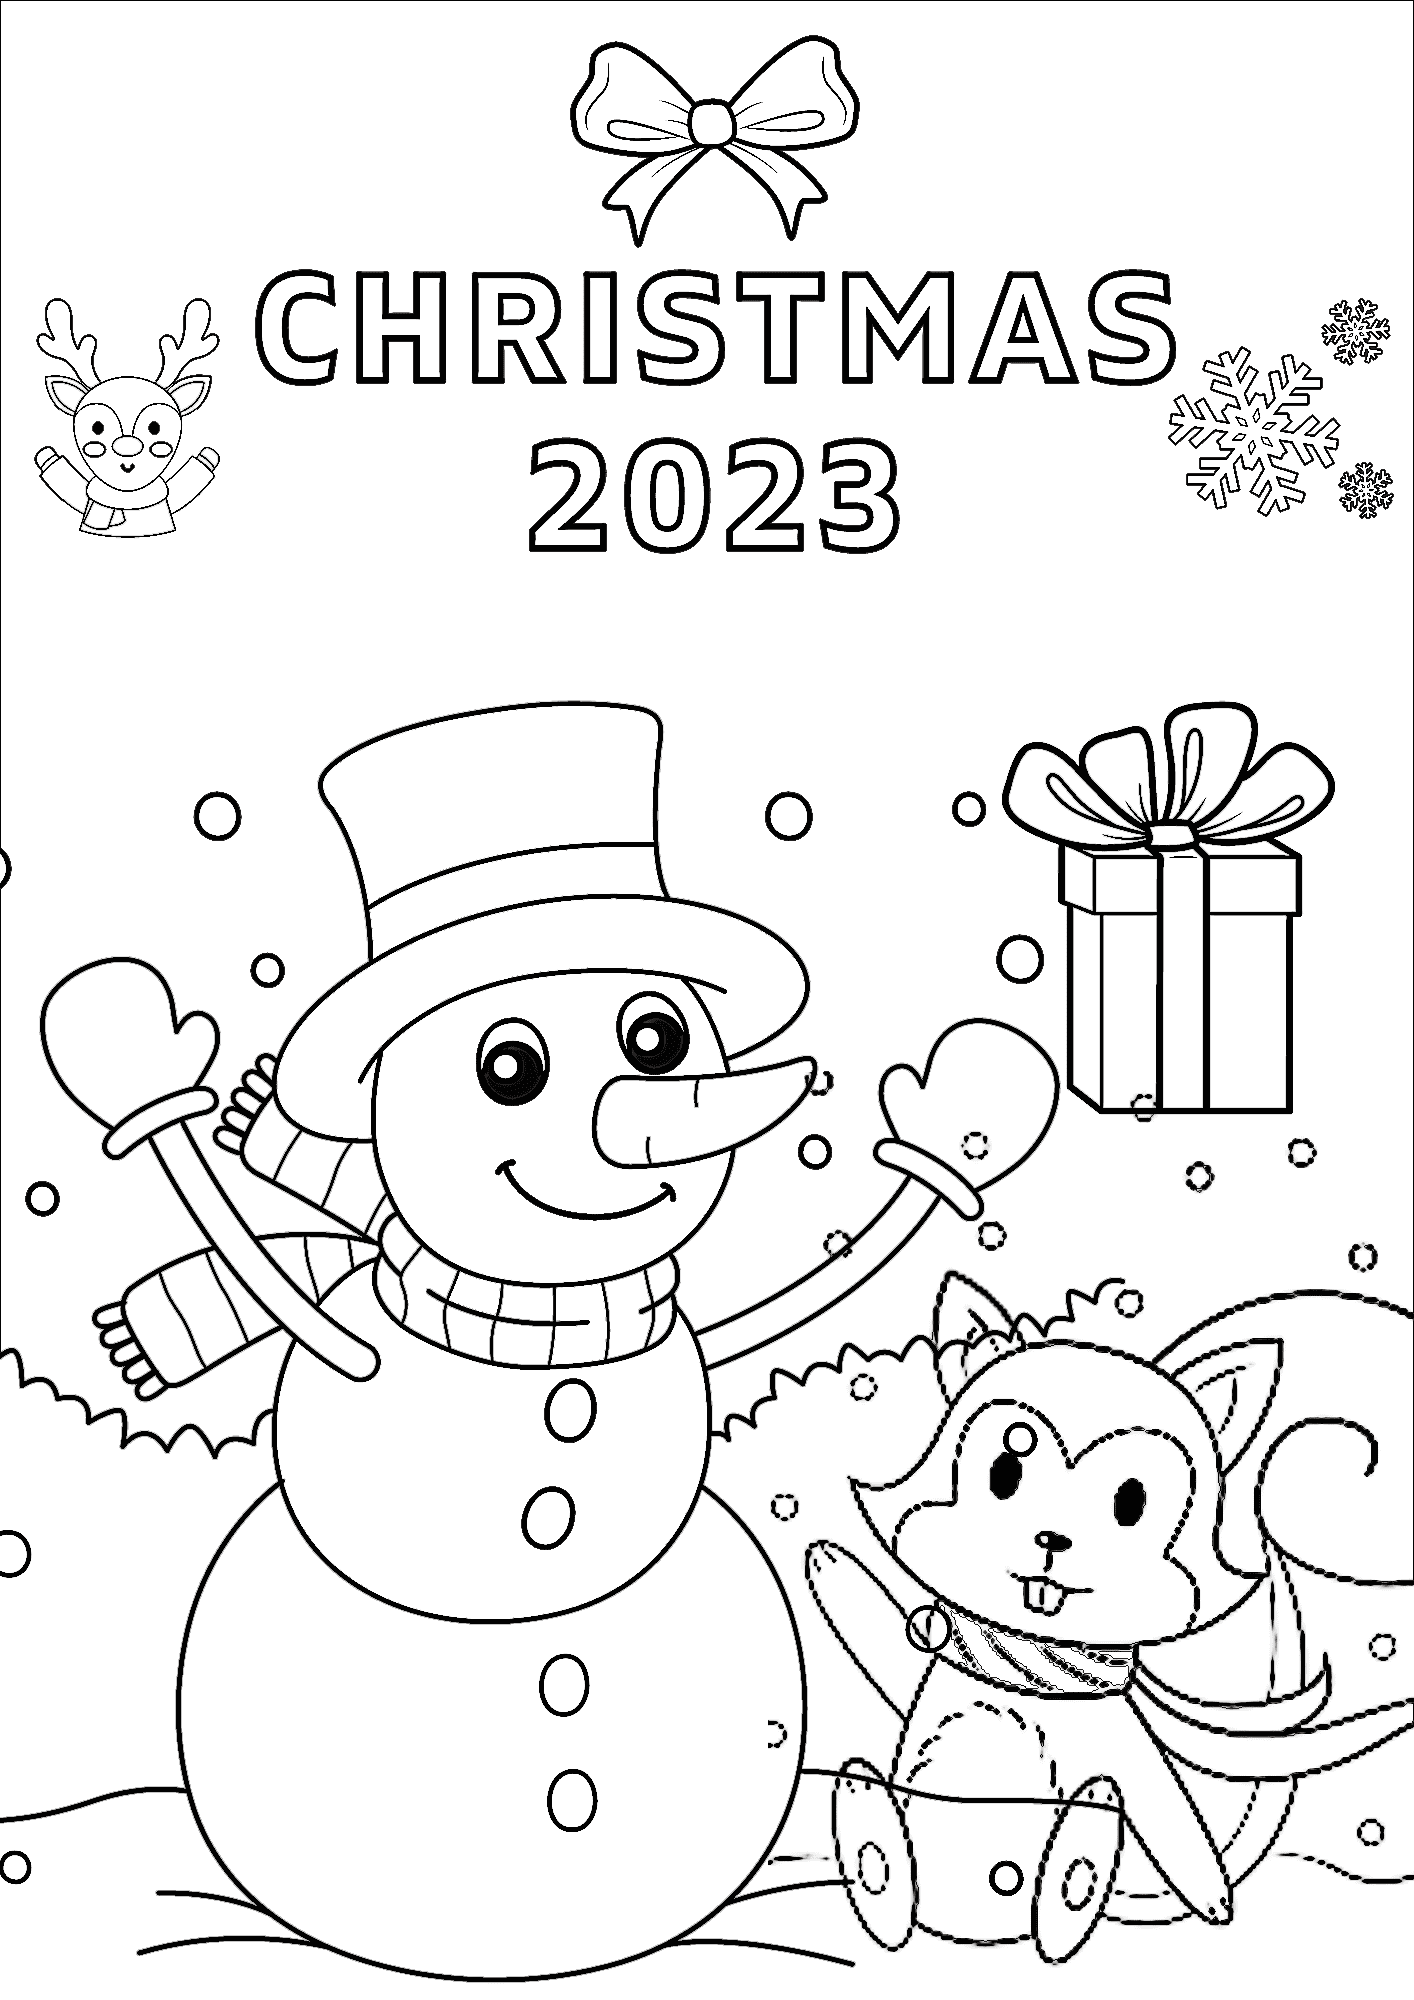 Merry Christmas 2023 Drawing